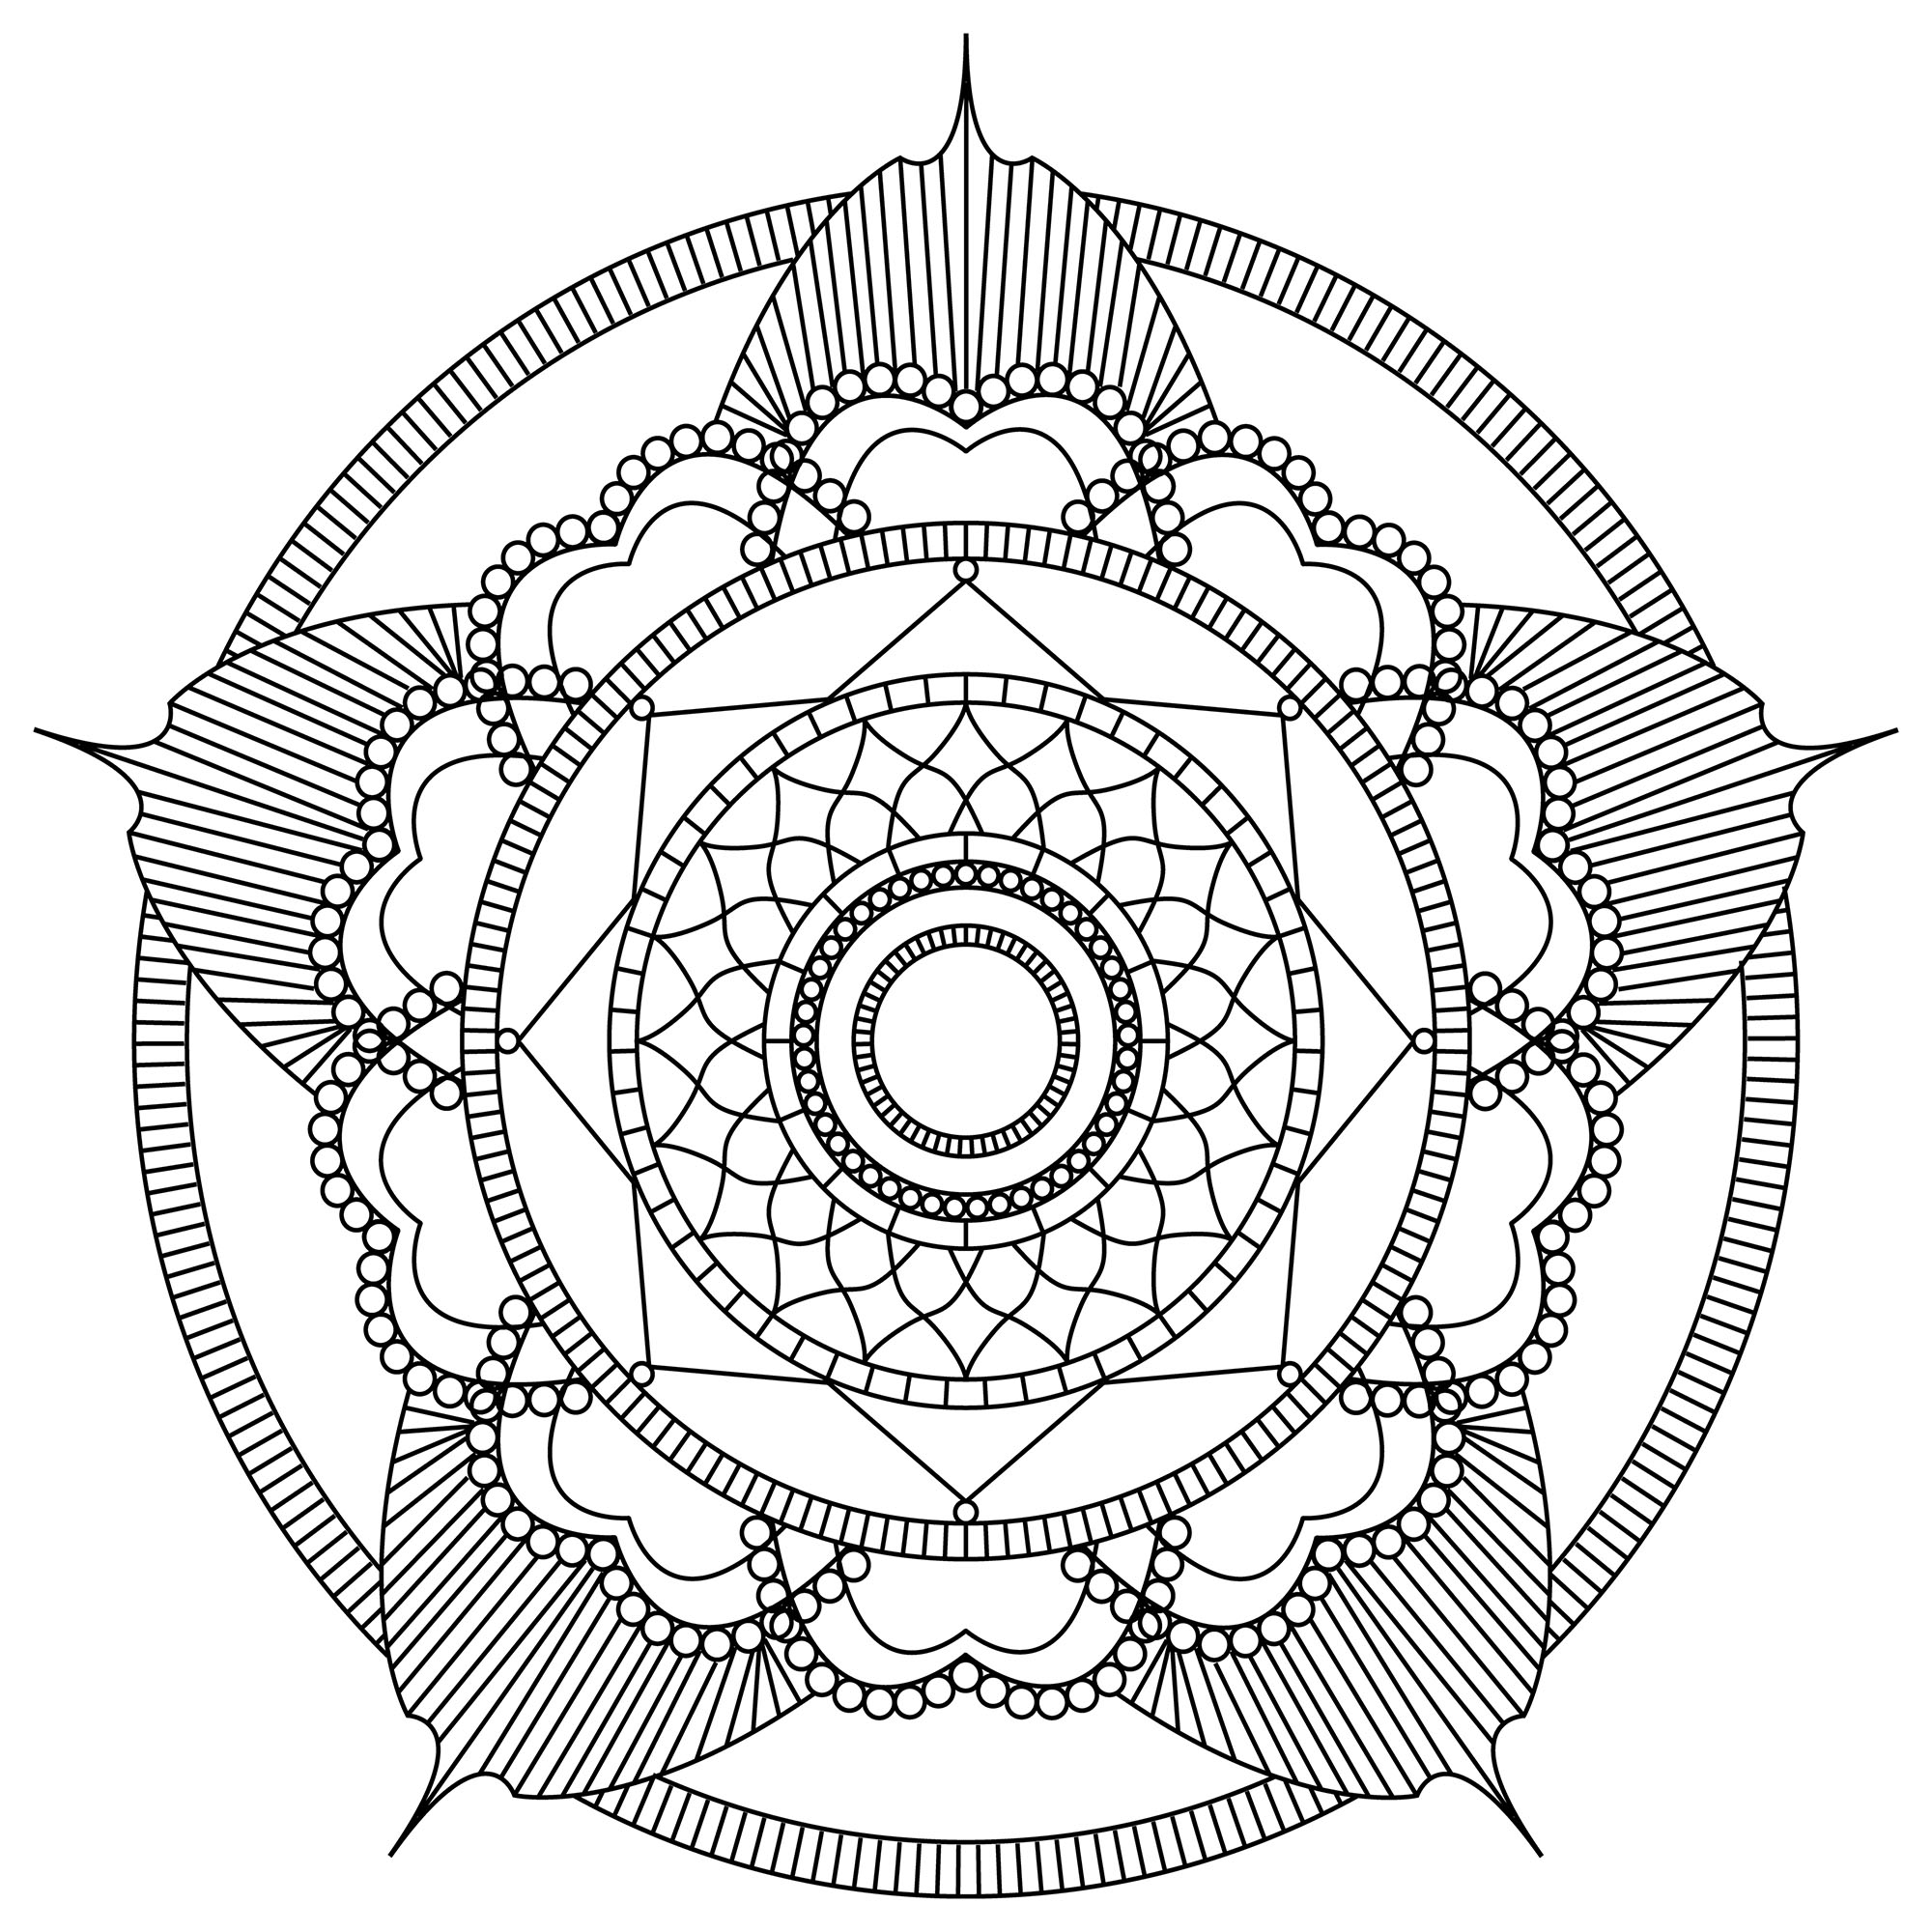 If you search for a Mandala not too complicated to complete, but still with a relative difficulty level, this one is good for you.